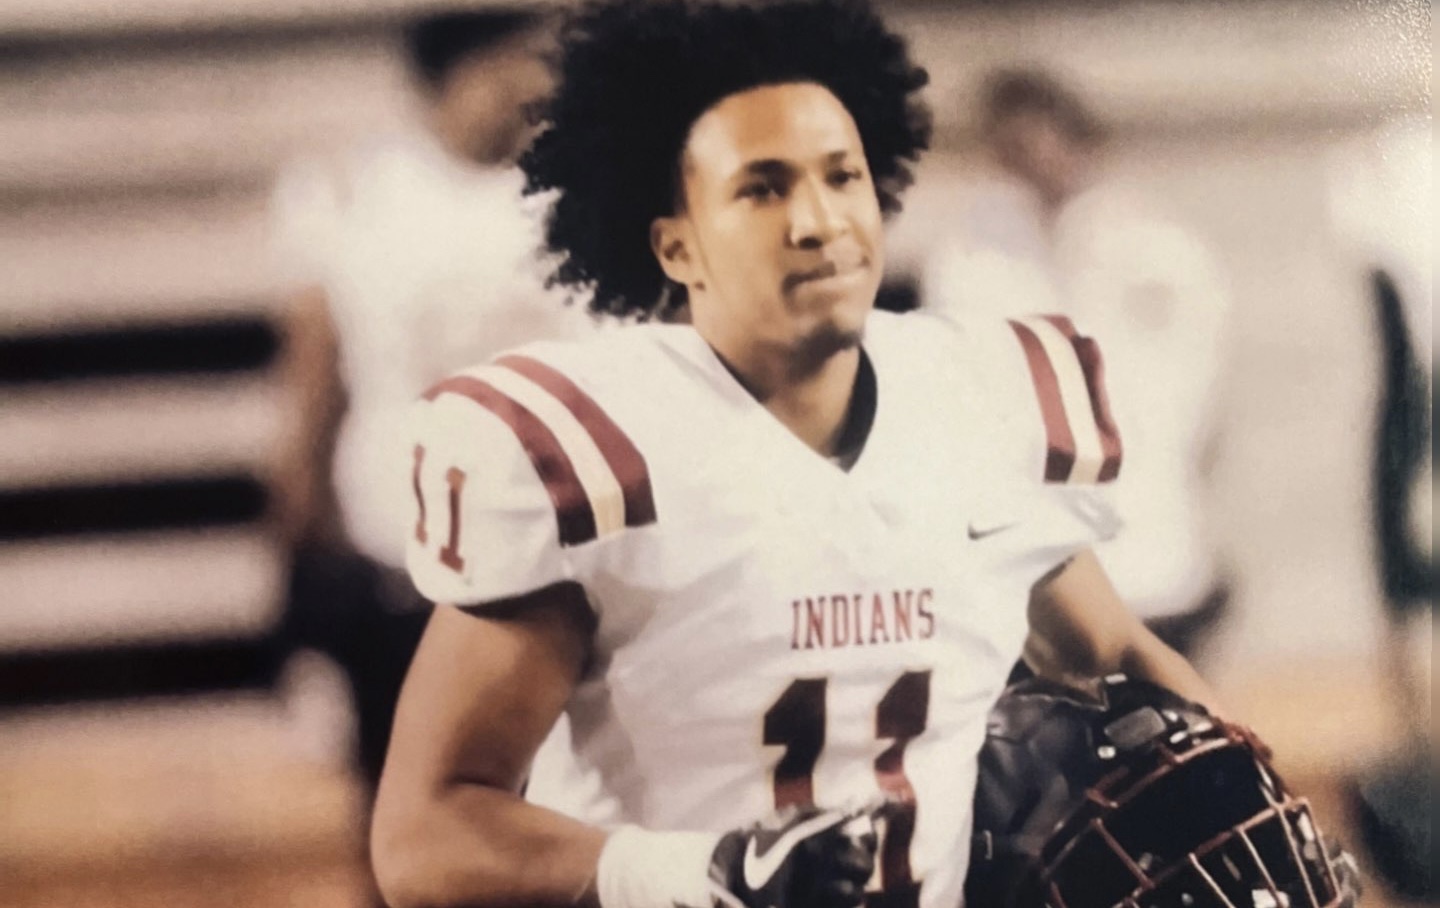 Family seeks justice in unsolved killing of son, former PVHS football star